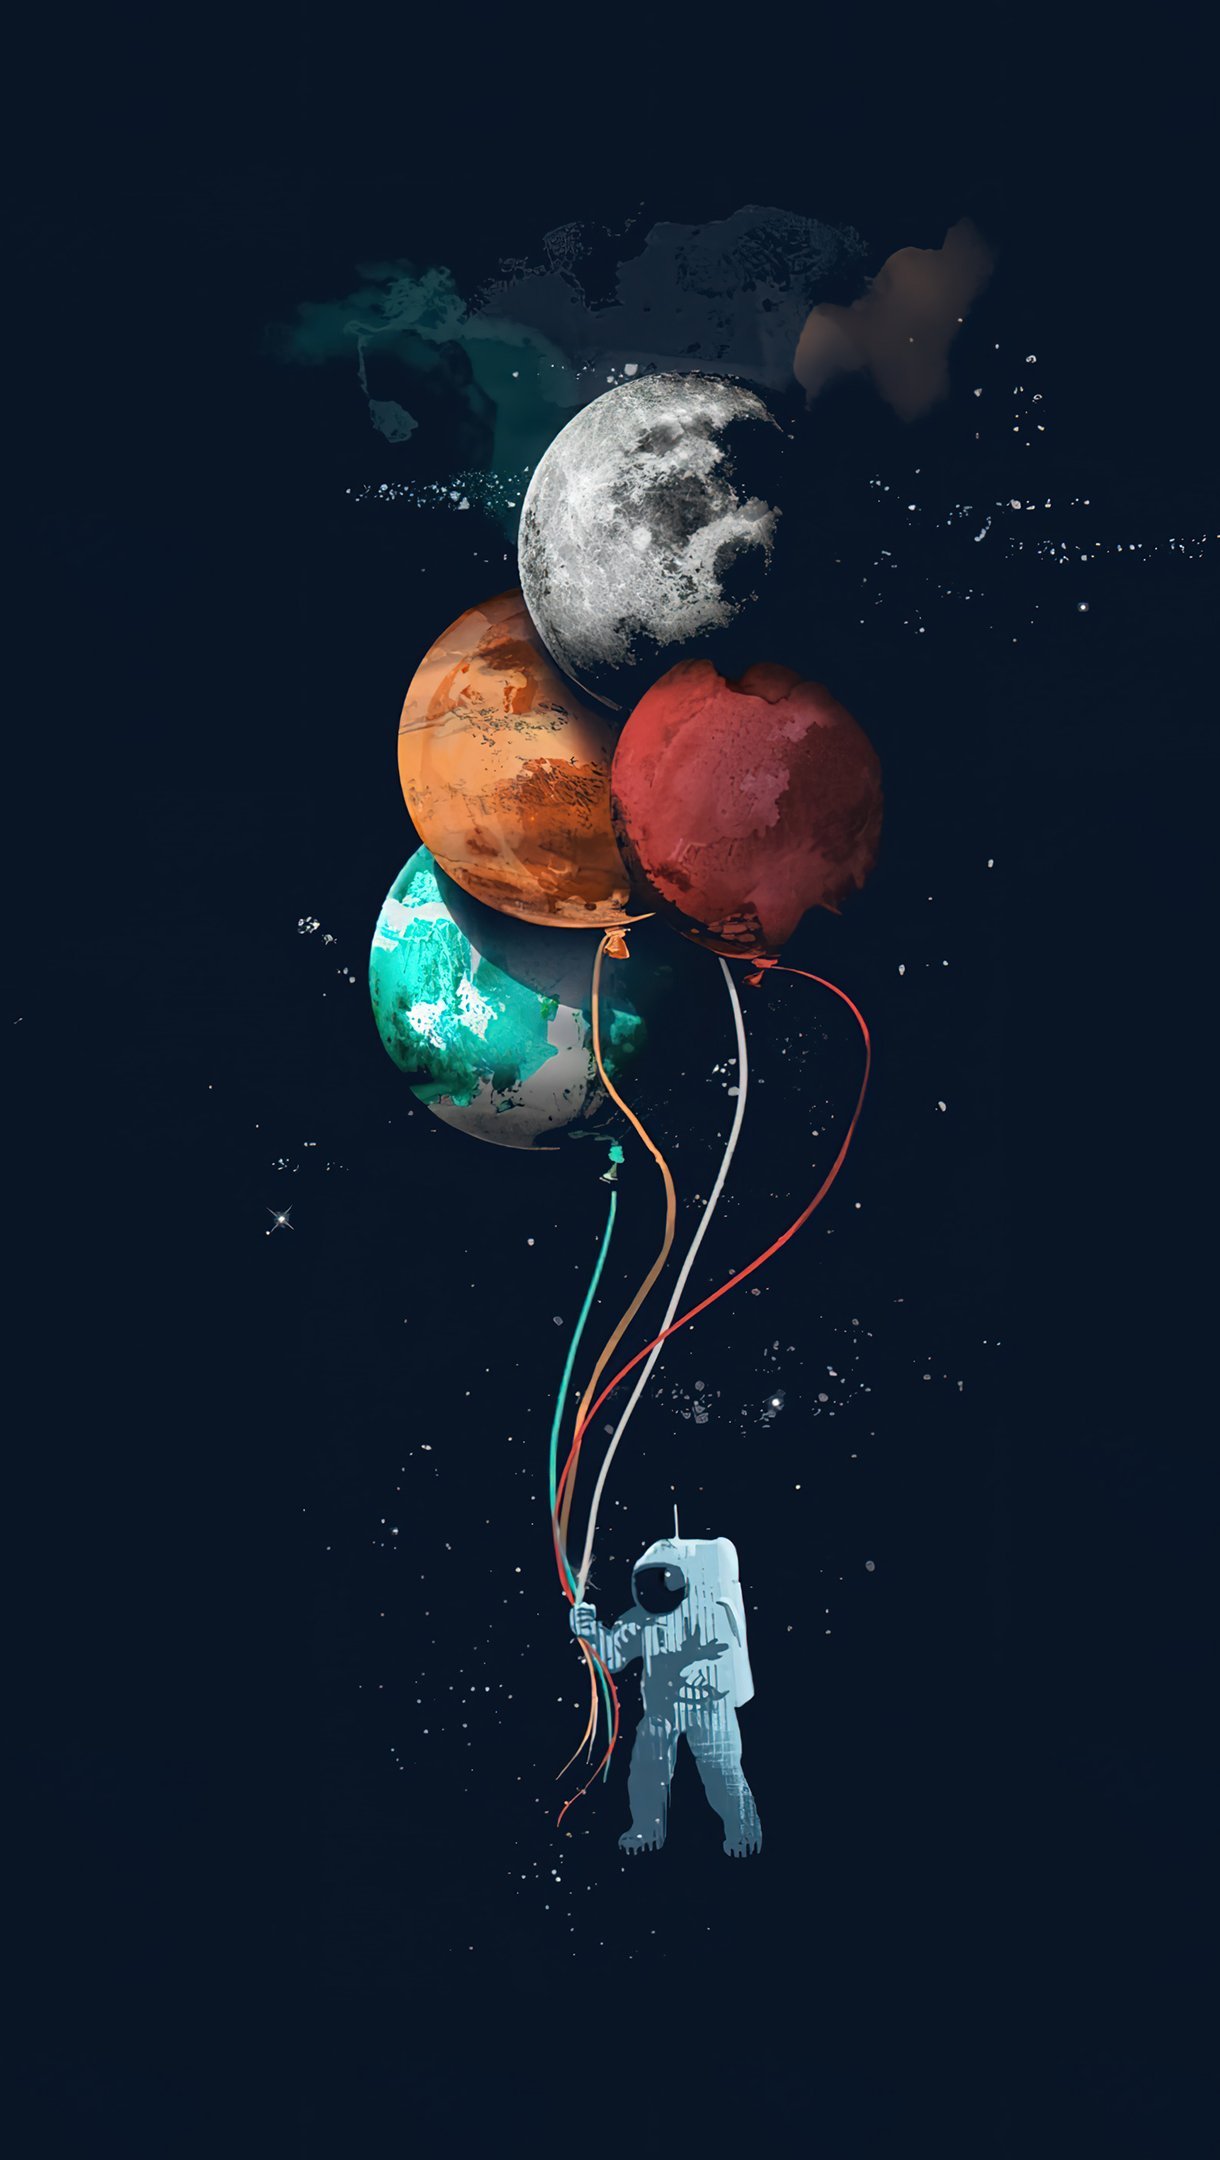 Wallpaper Astronaut with planets as balloons Vertical